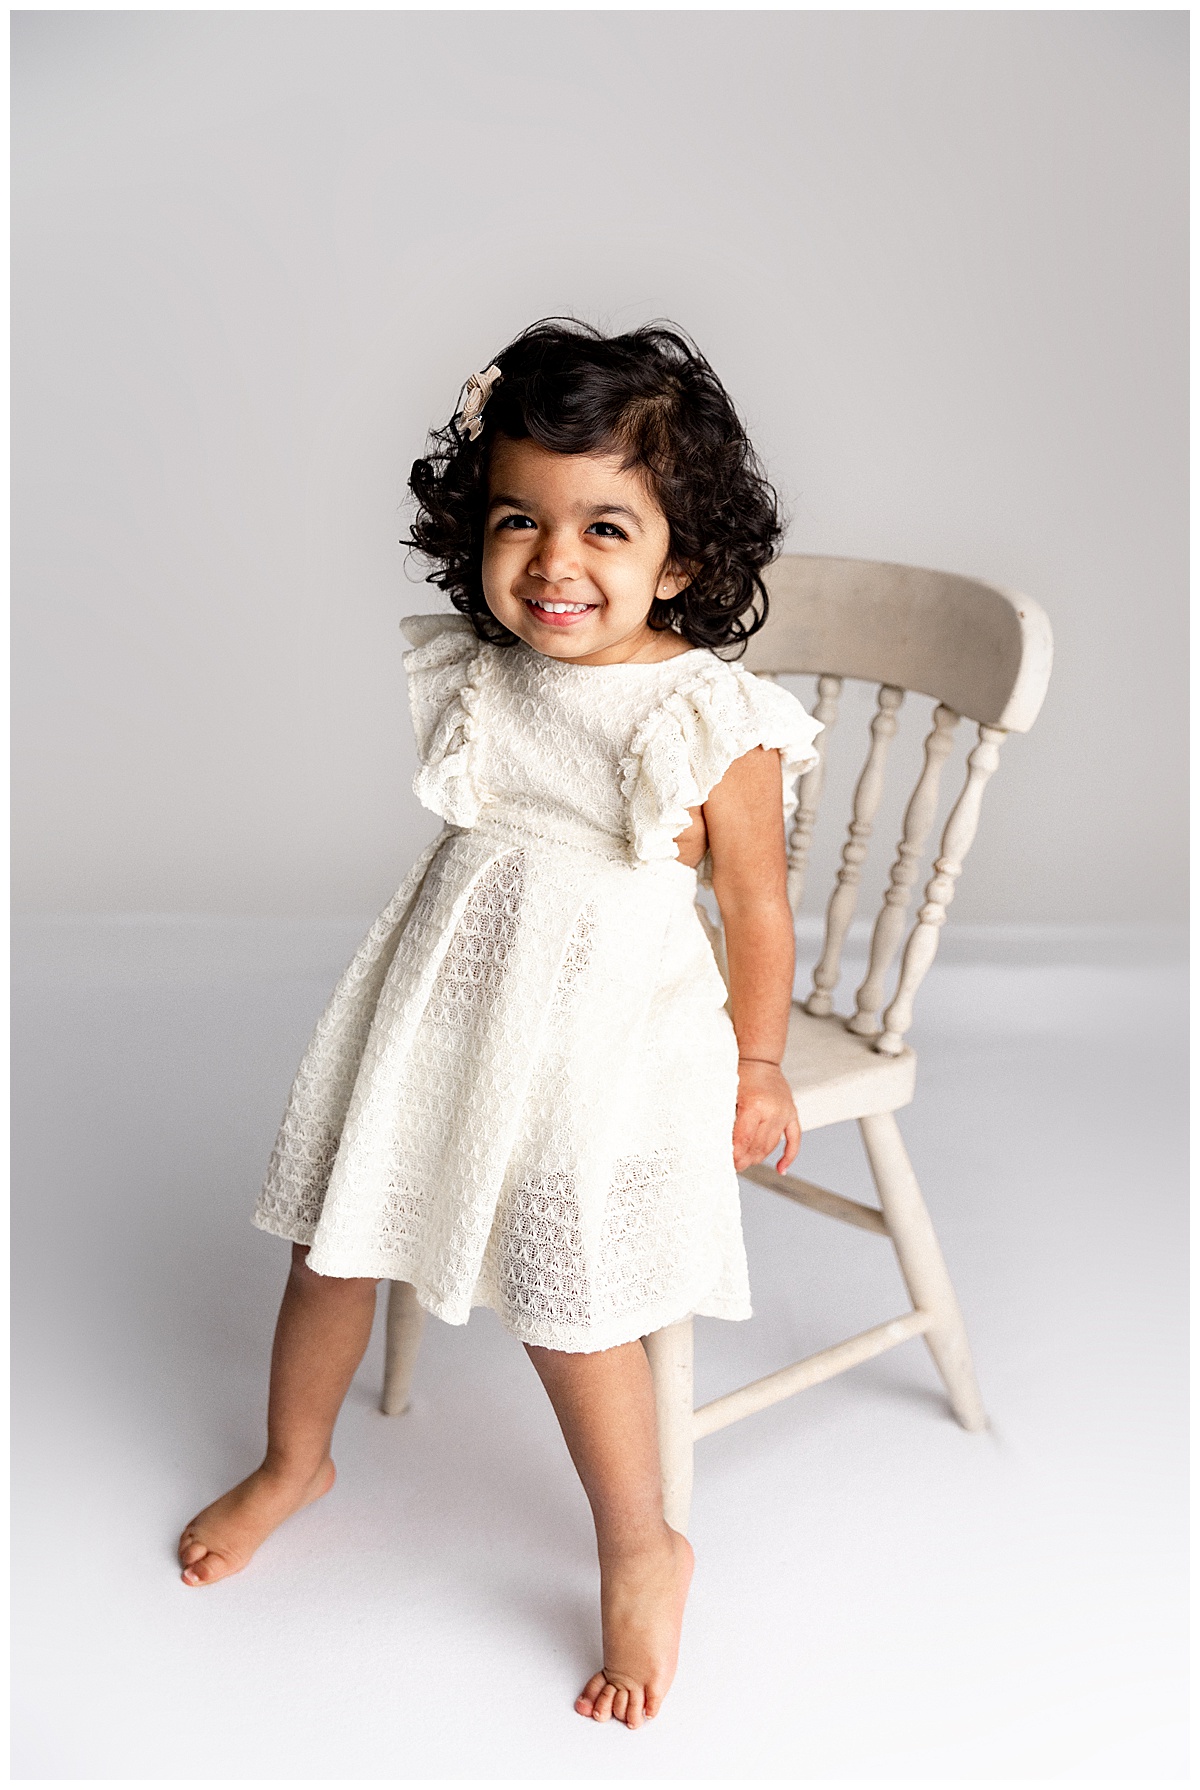 Baby girls sits on chair wearing white dress for Virginia Maternity Photographer